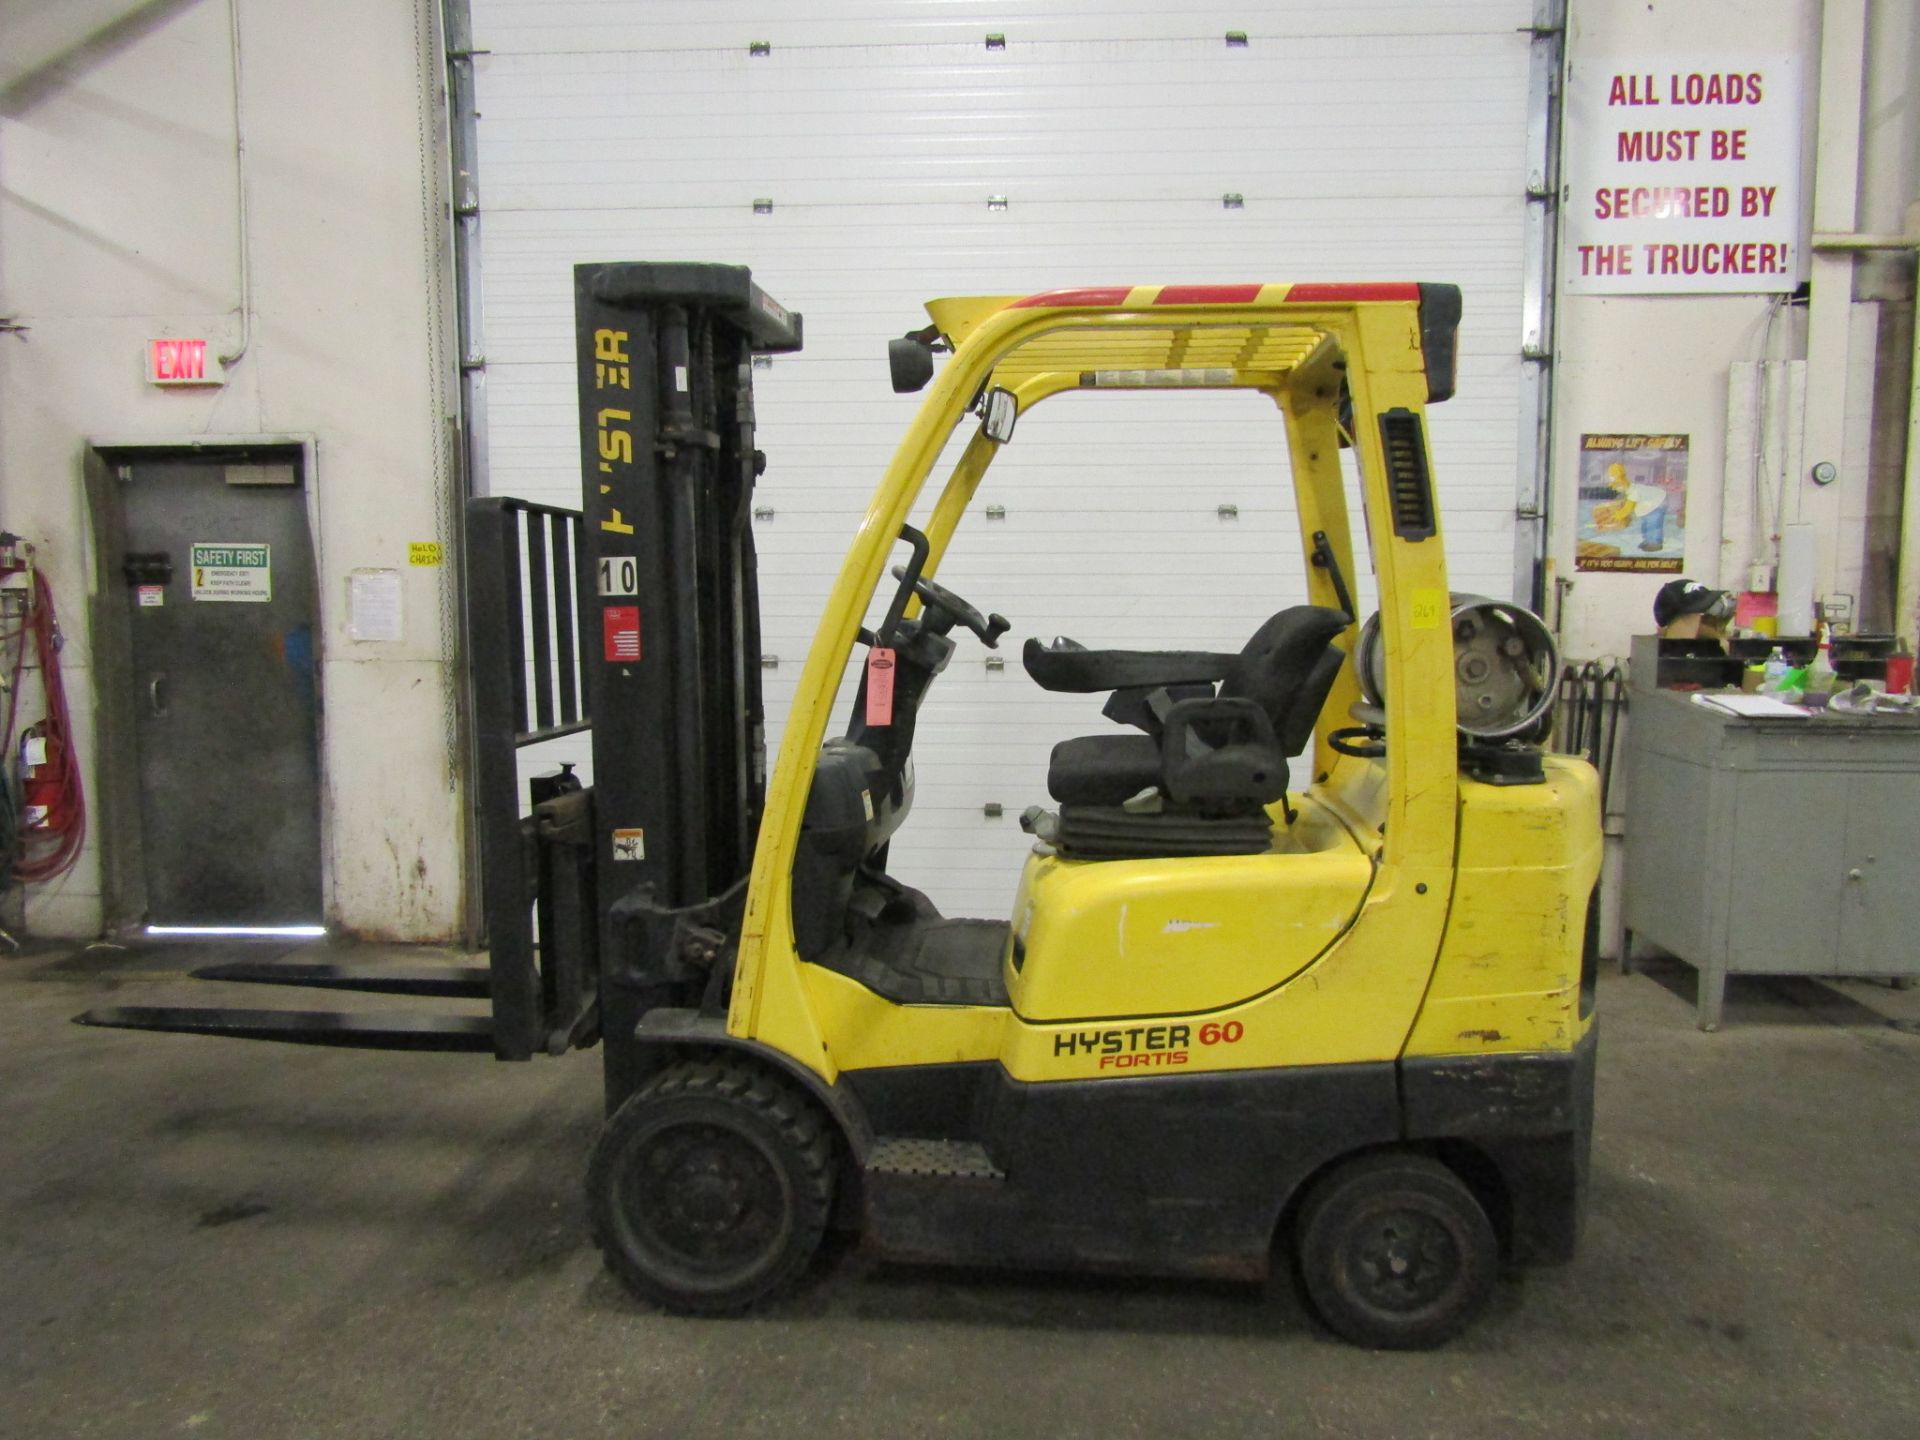 2011 Hyster 6000lbs Capacity Forklift with 3-stage mast - LPG (propane) with sideshift (no propane